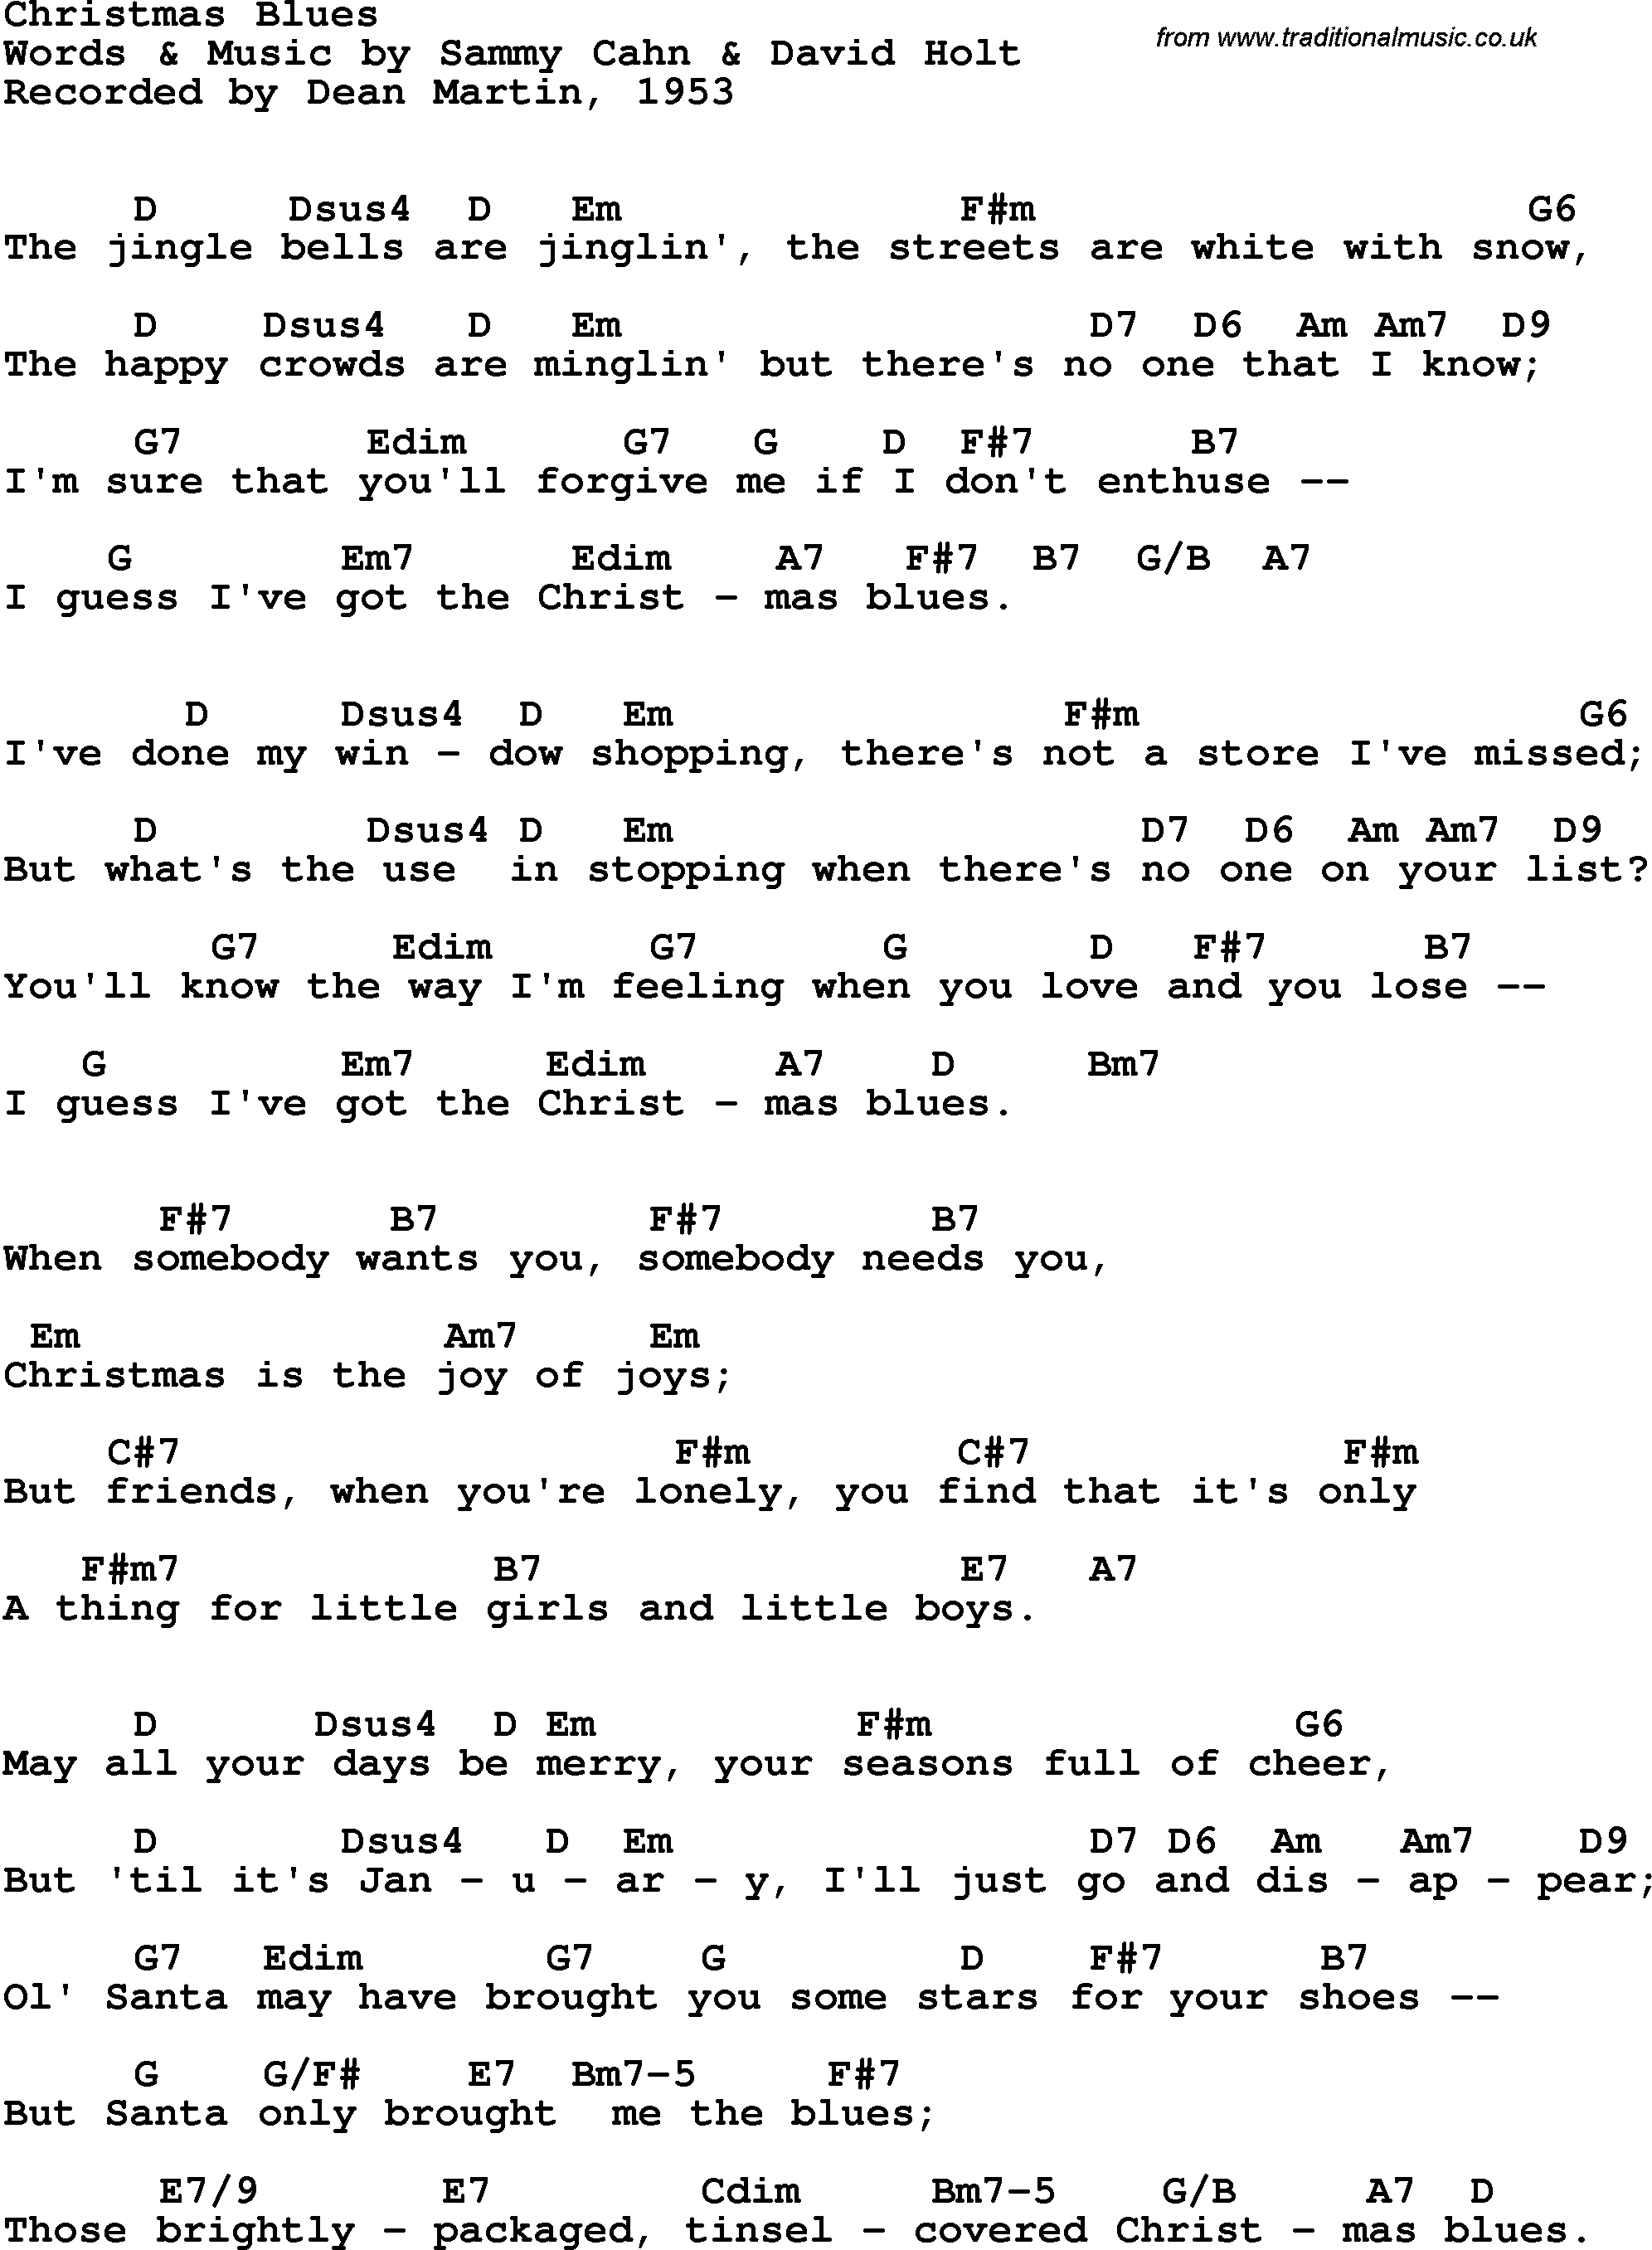 Song Lyrics with guitar chords for Christmas Blues - Dean Martin, 1953